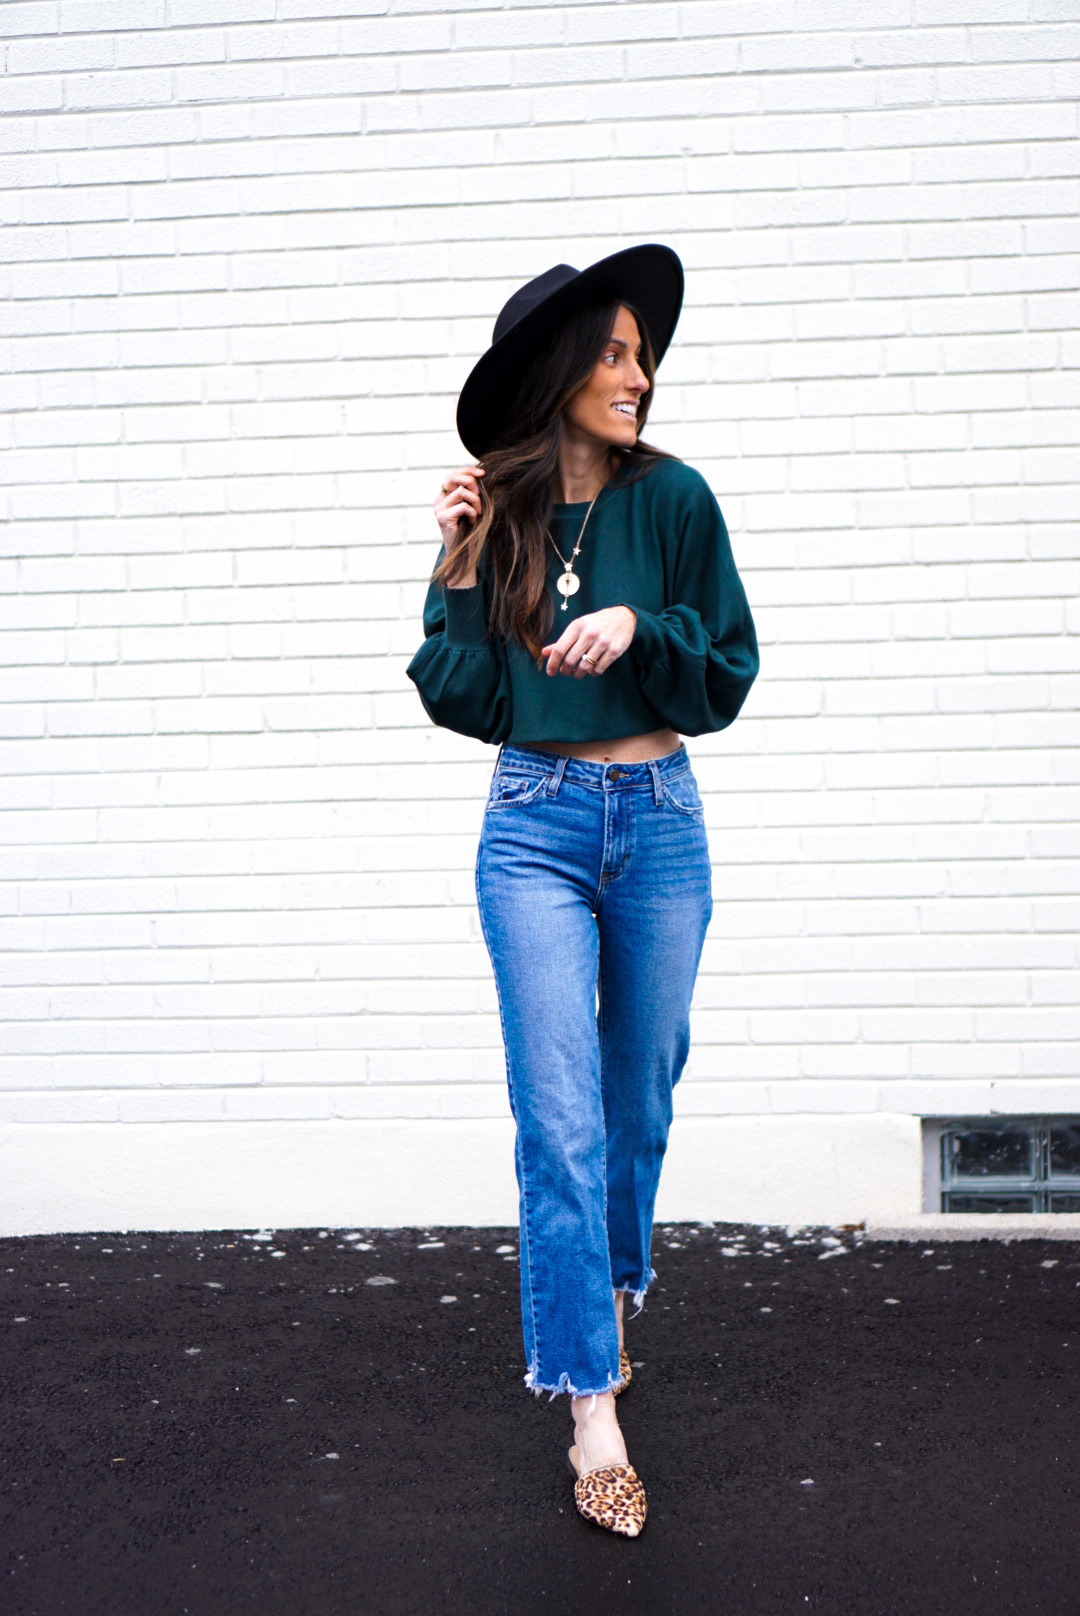 How to Style Distressed Mom Jeans, Fashion Tips